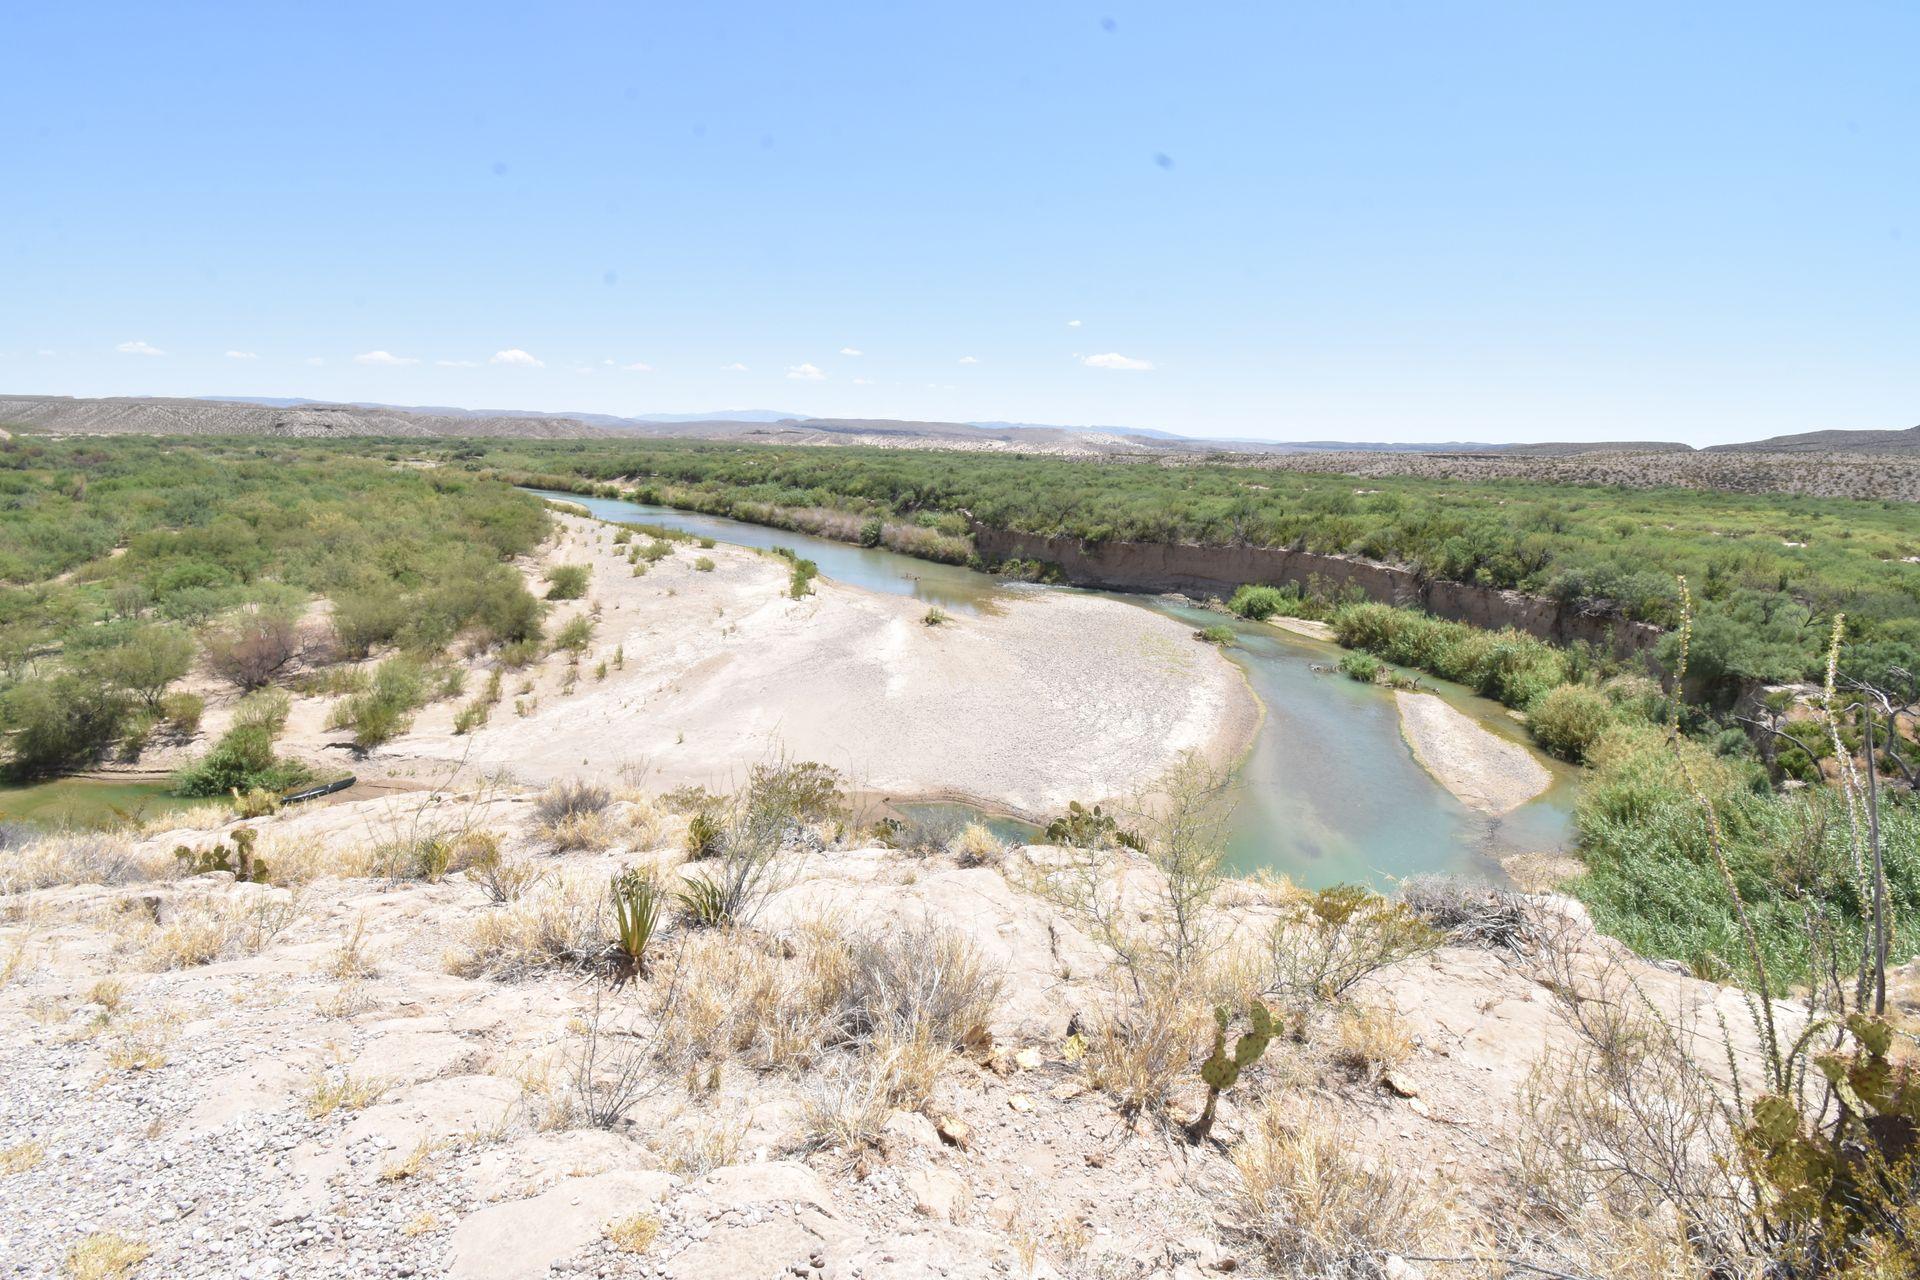 Looking down at the Rio Grande River next to a sandy beach. The beach is in Mexico.